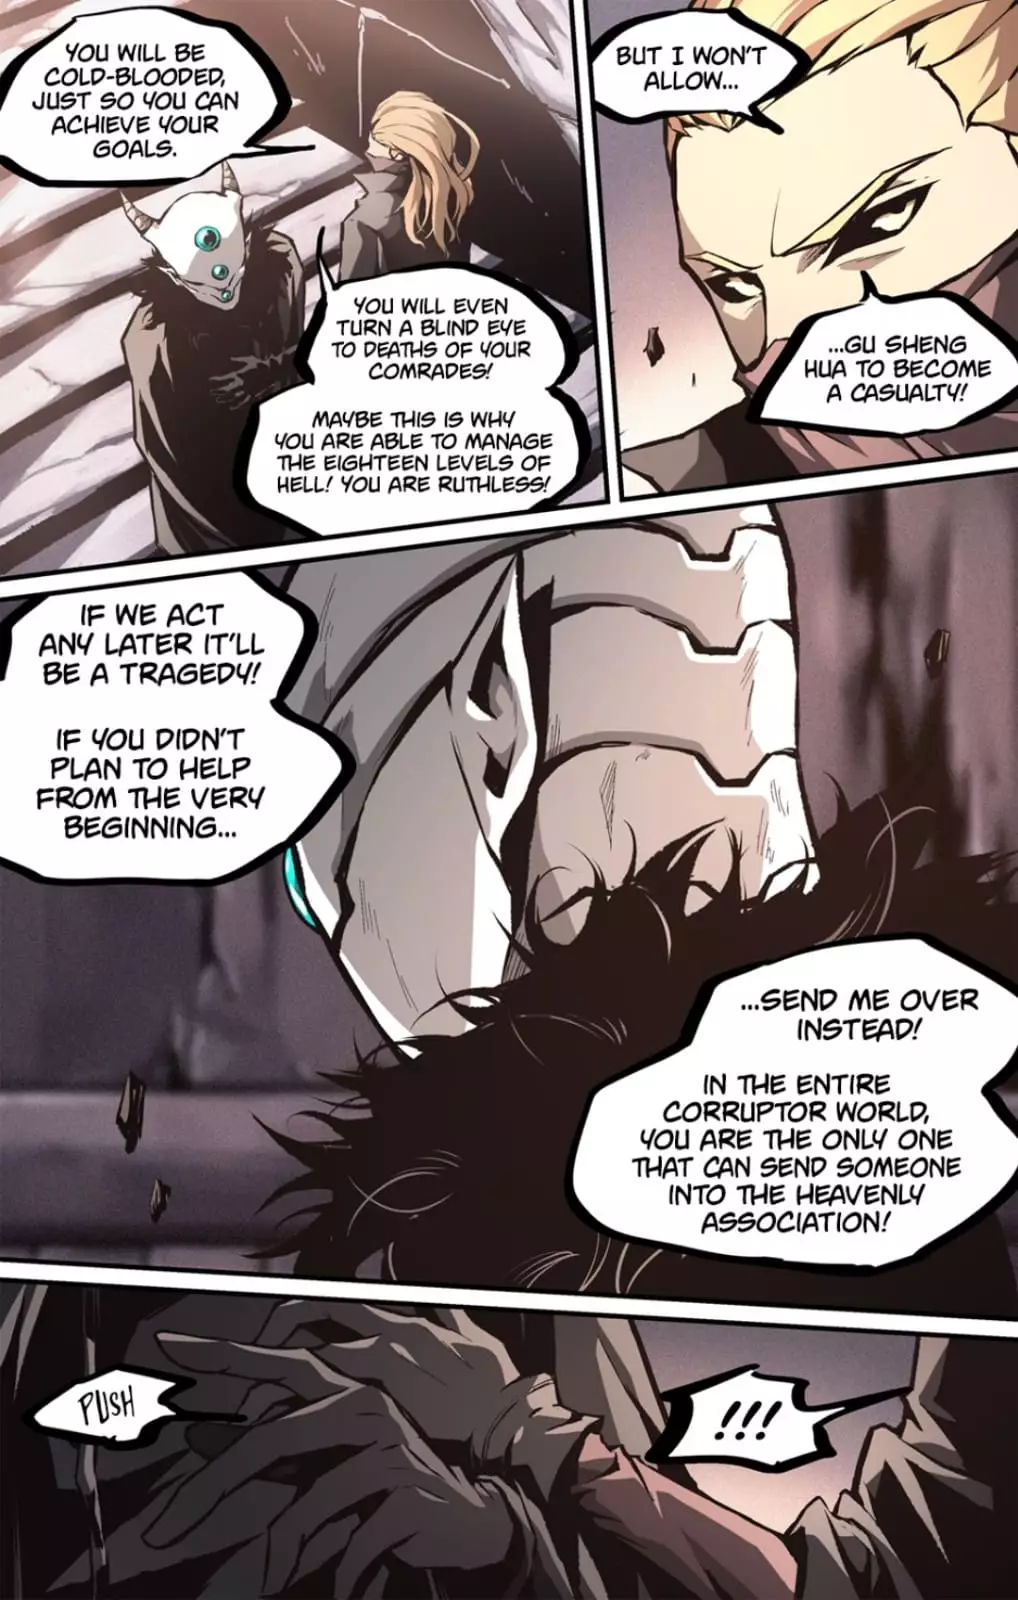 Outlaws - 44 page 6-45a20724